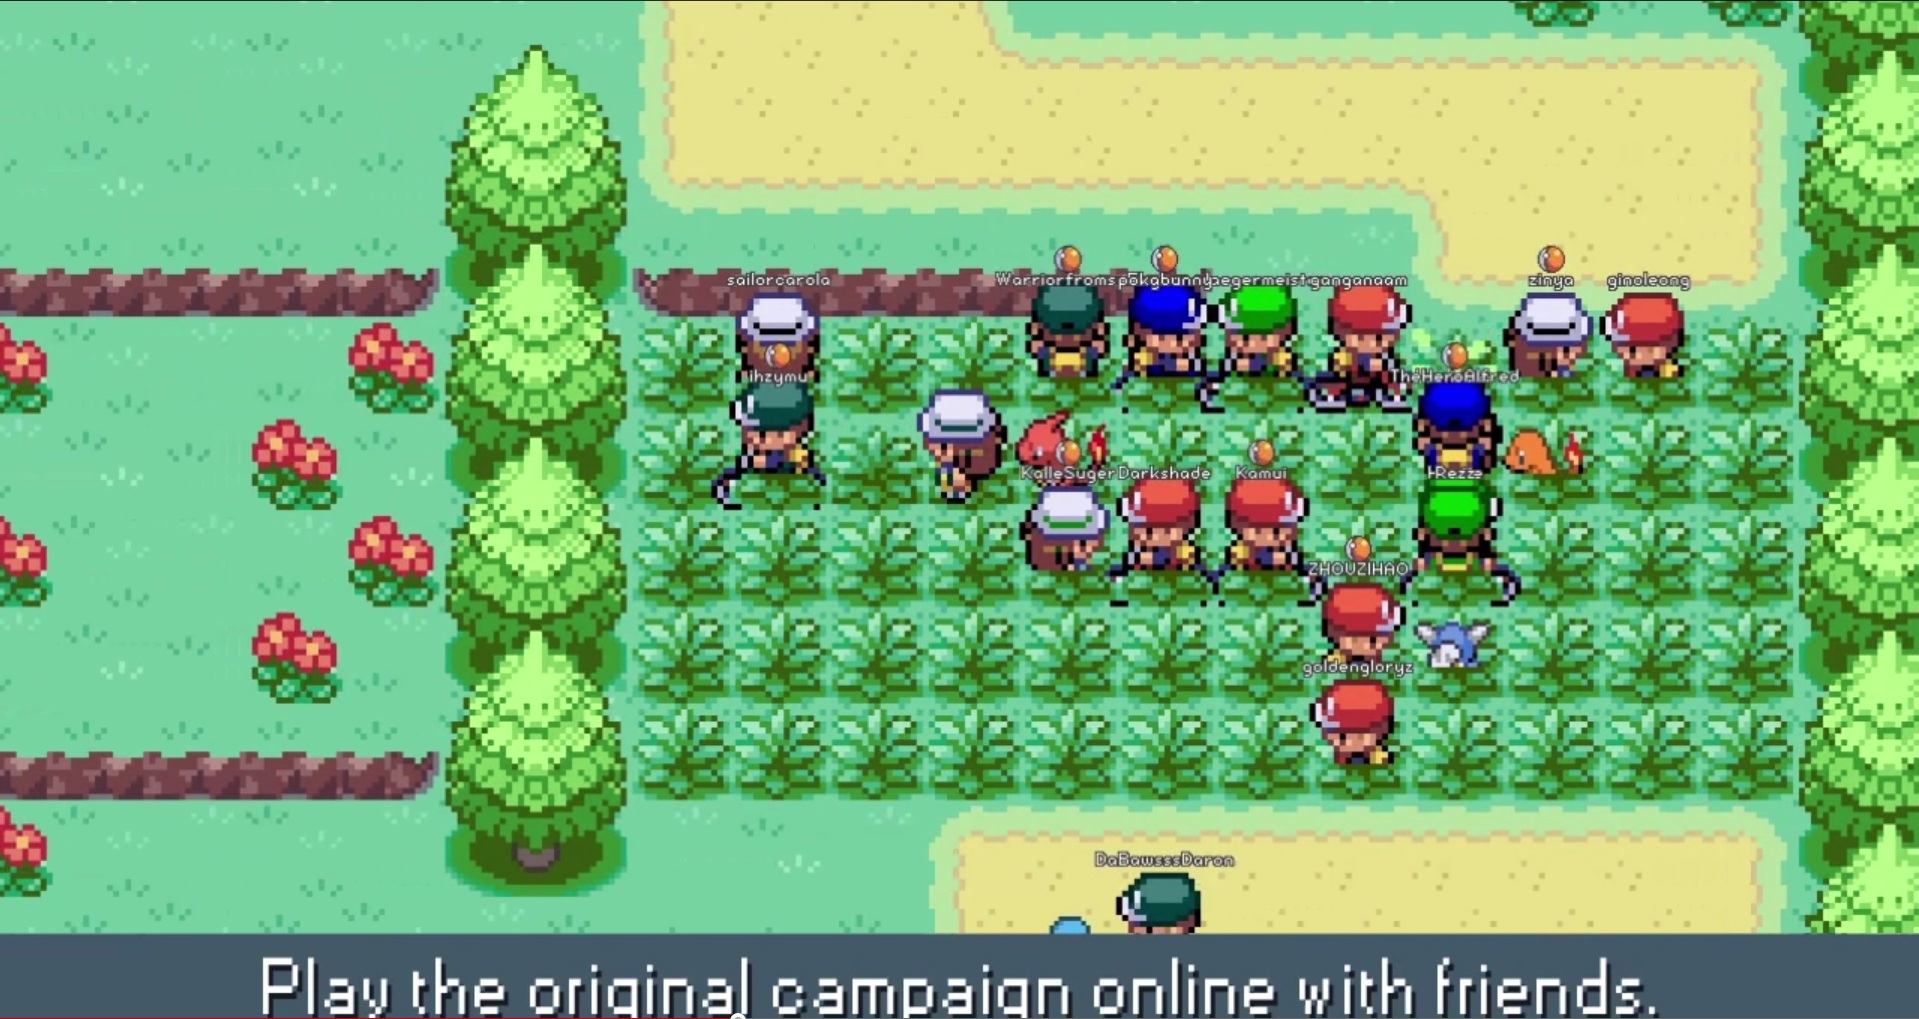 PokeMMO lets you play classic Pokémon games online on Android